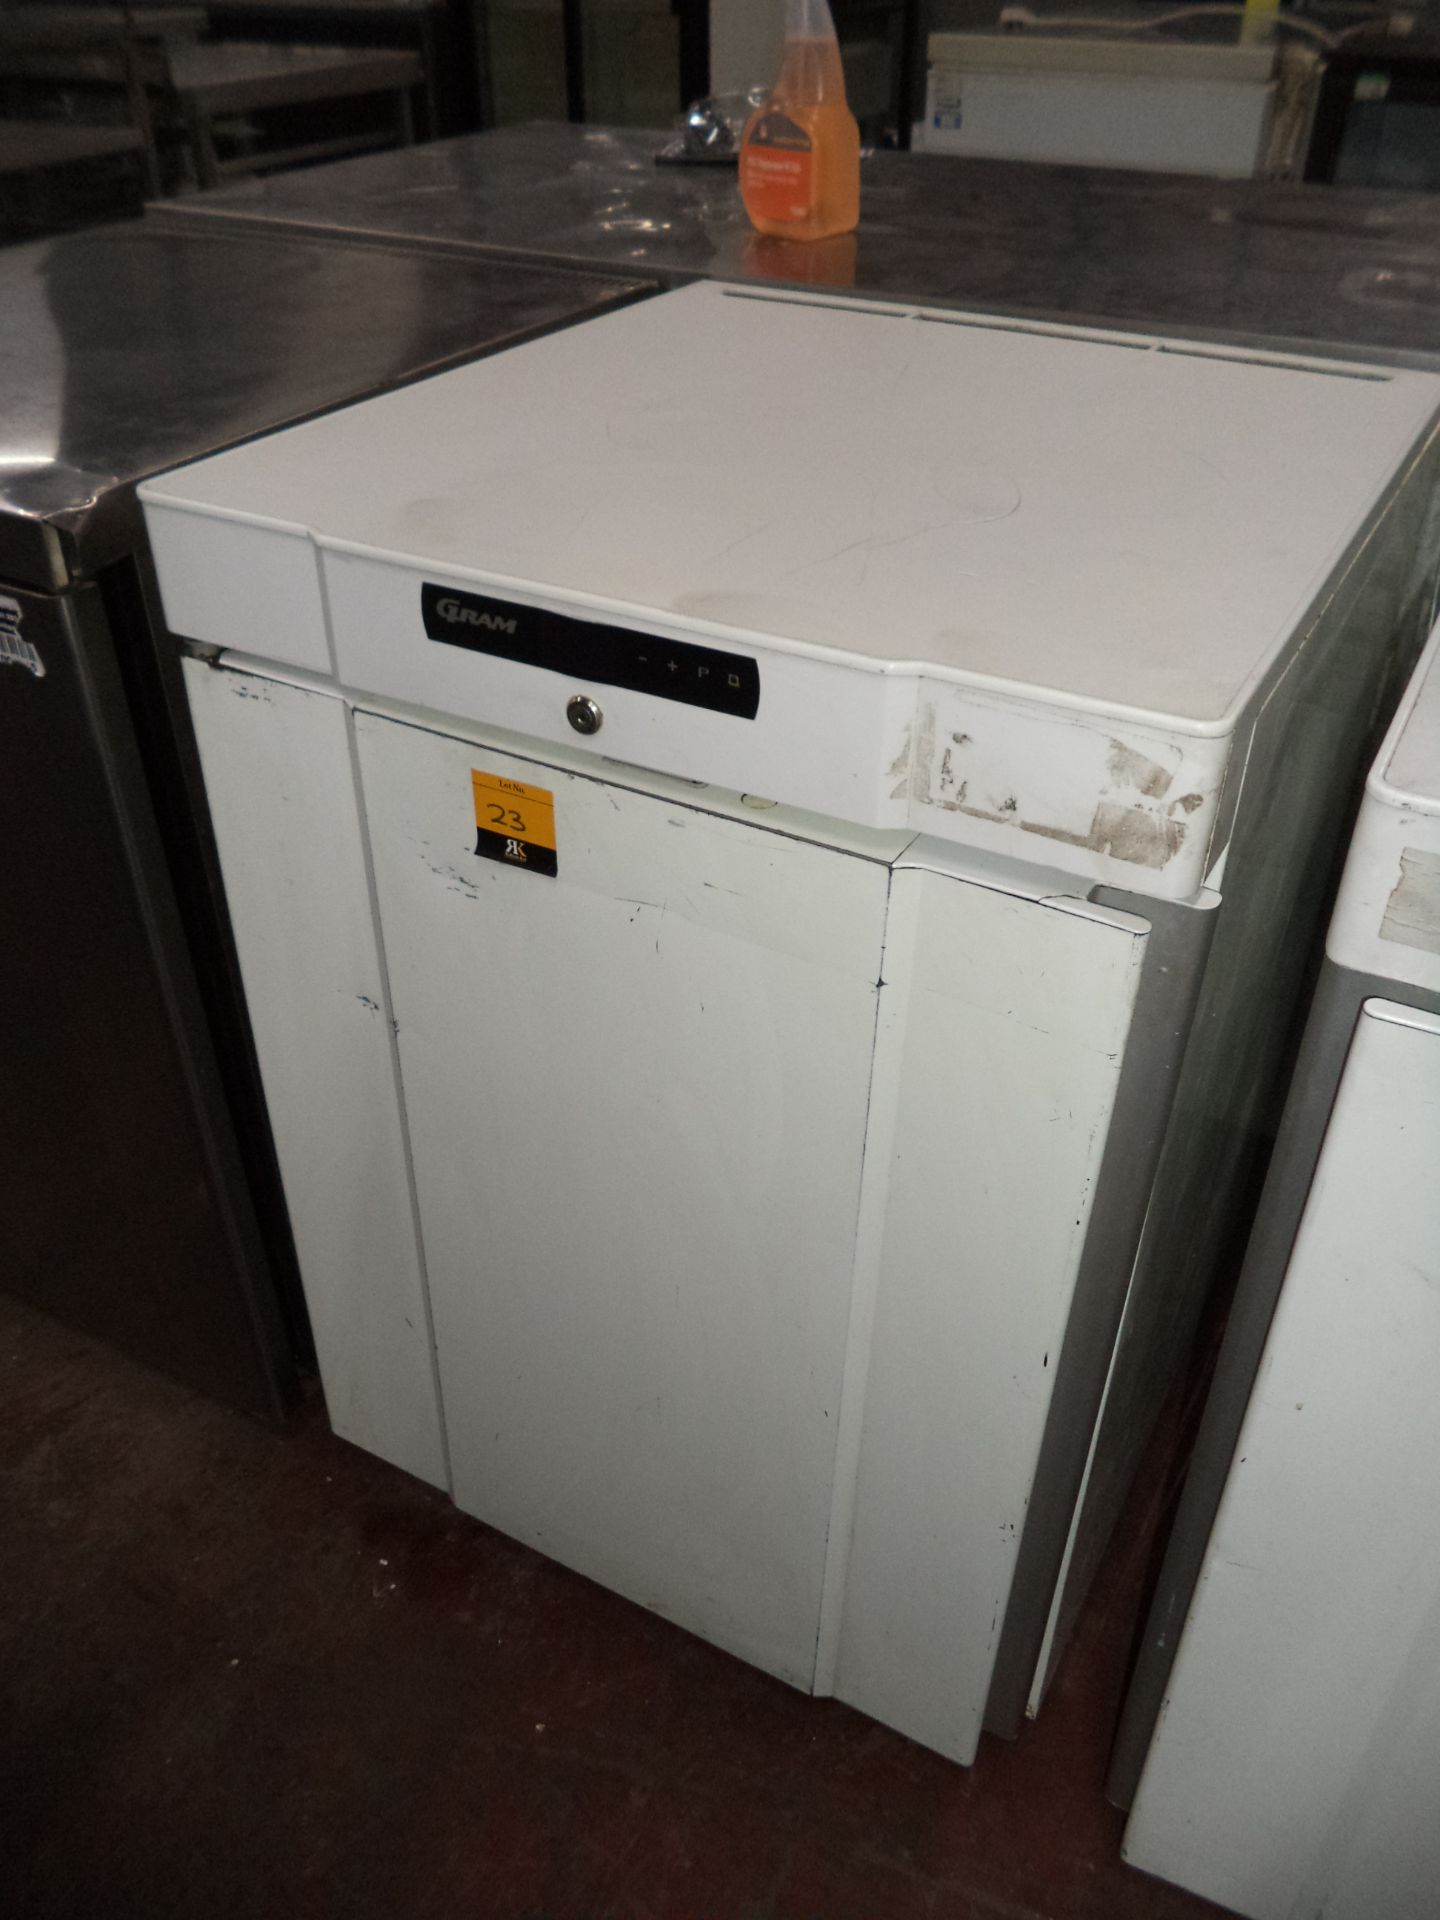 Gram counter height freezer, model F210 IMPORTANT: Please remember goods successfully bid upon